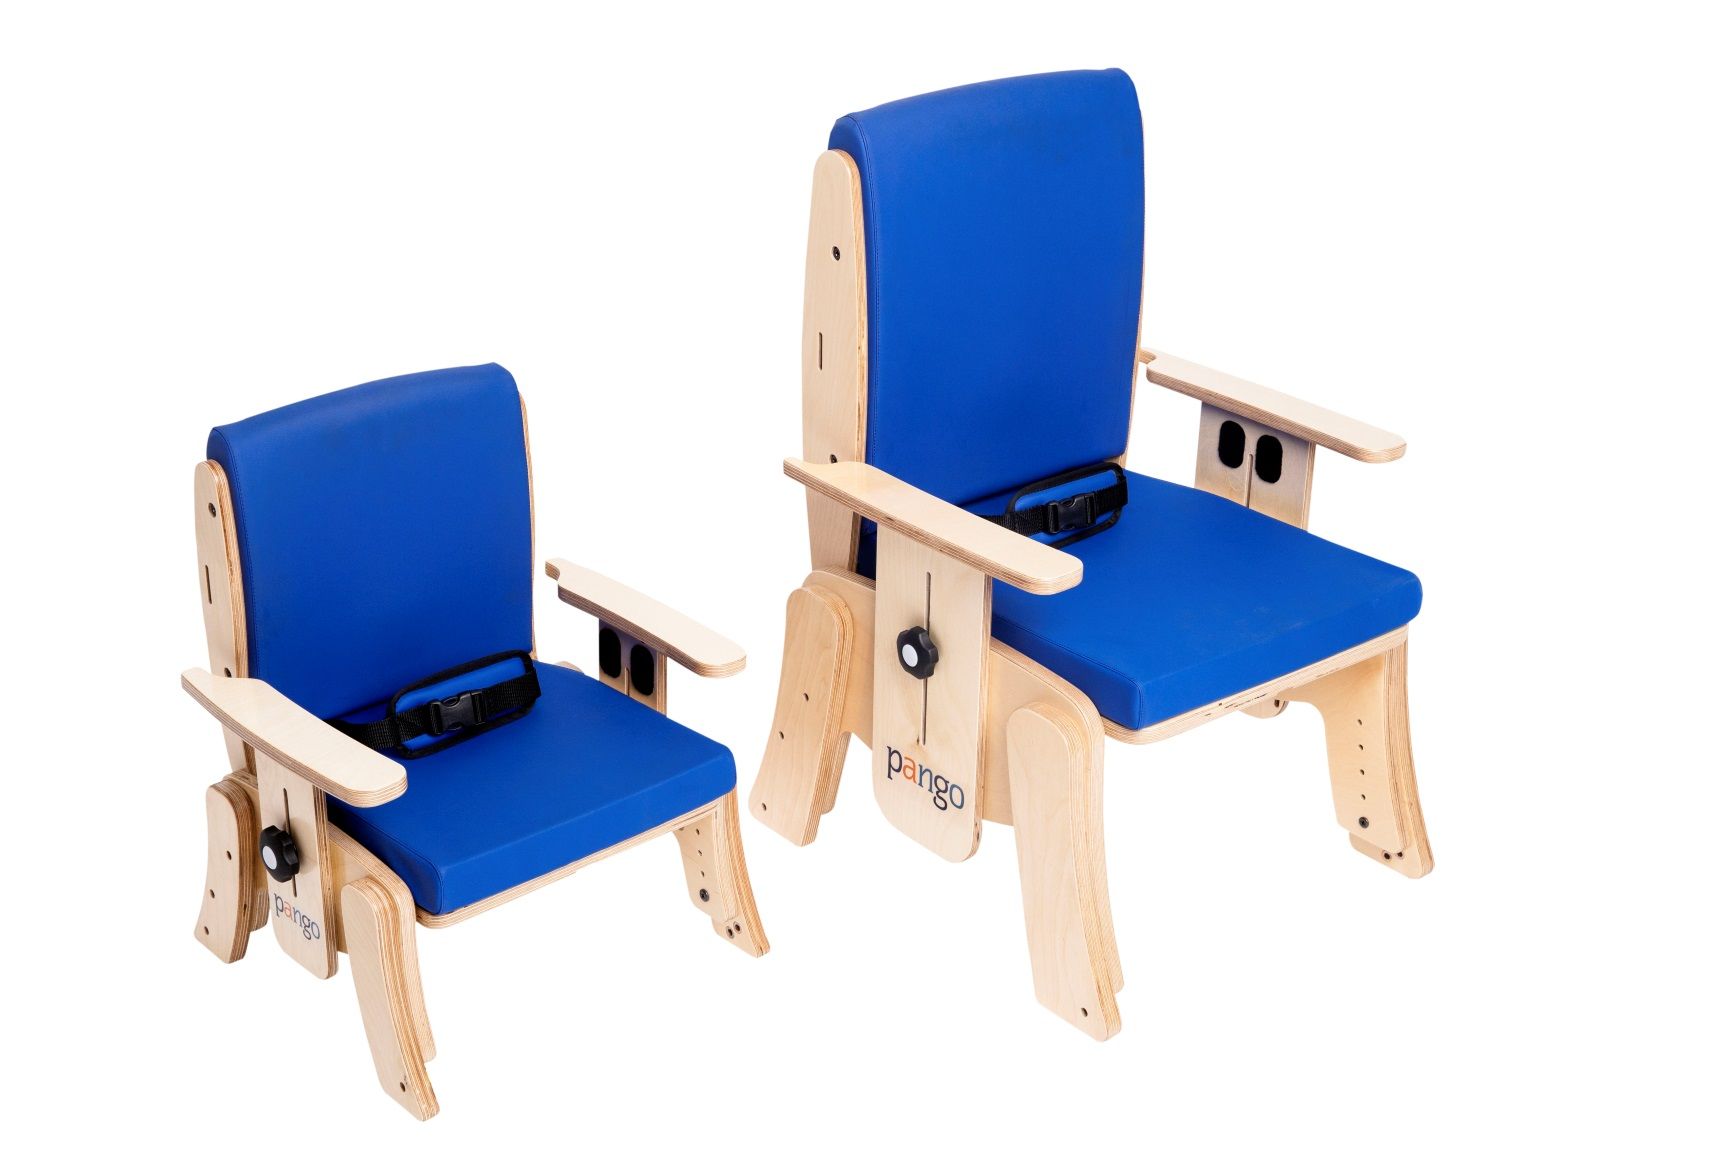 Pediatric Seating | Children's Chairs | Pediatric Positioning | Special